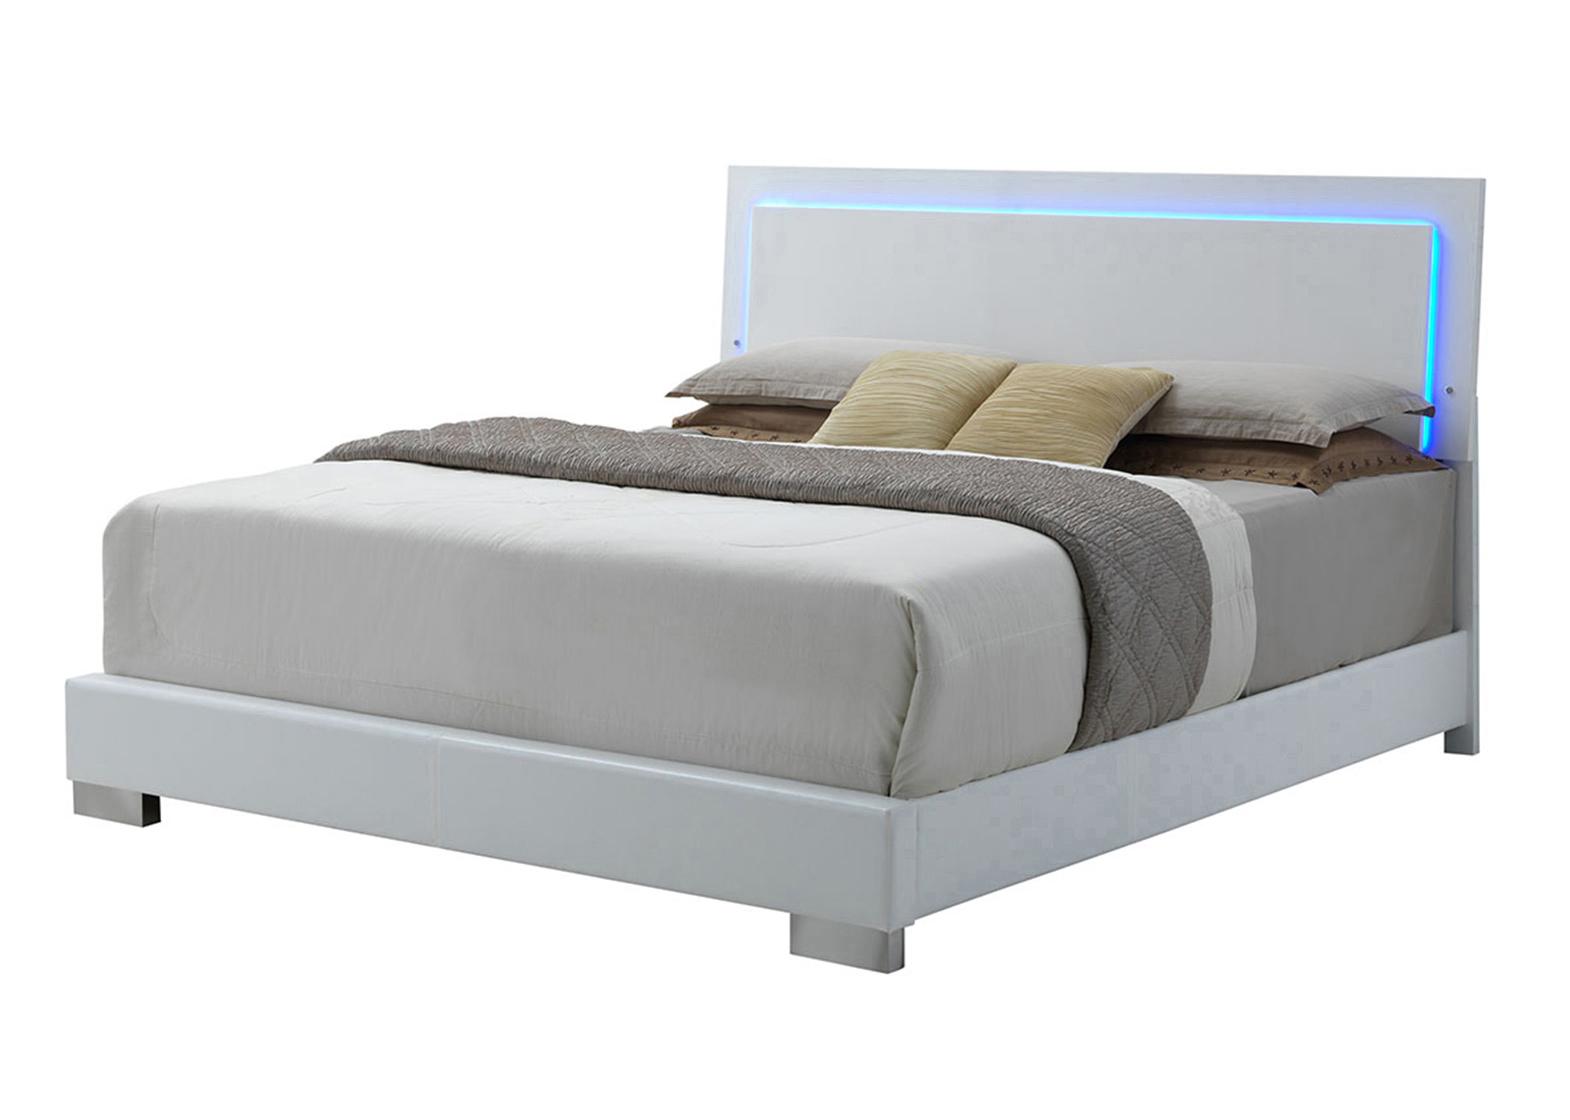 

    
Contemporary Glossy White Wood Queen Bed Coaster 203500Q Felicity
